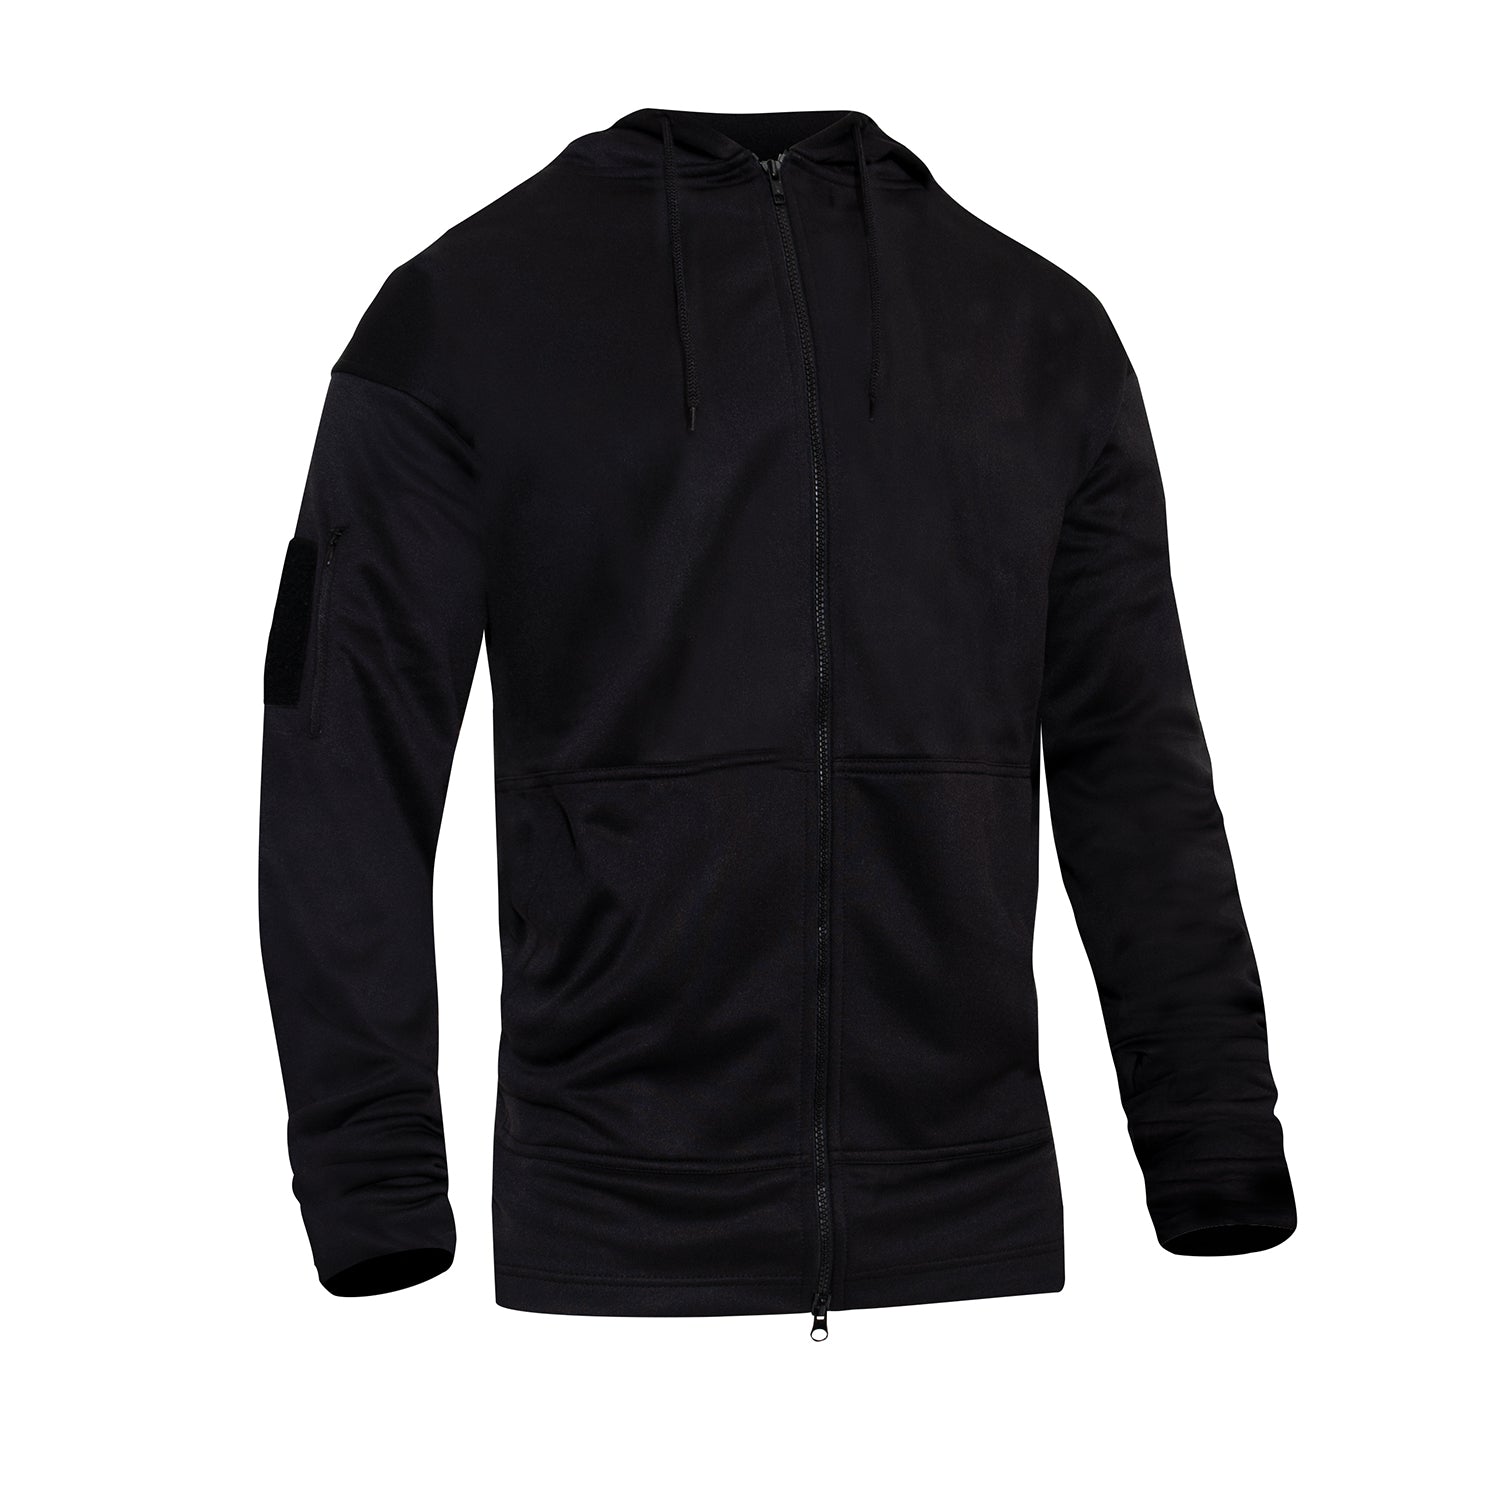 Rothco Concealed Carry Zippered Hoodie   Black